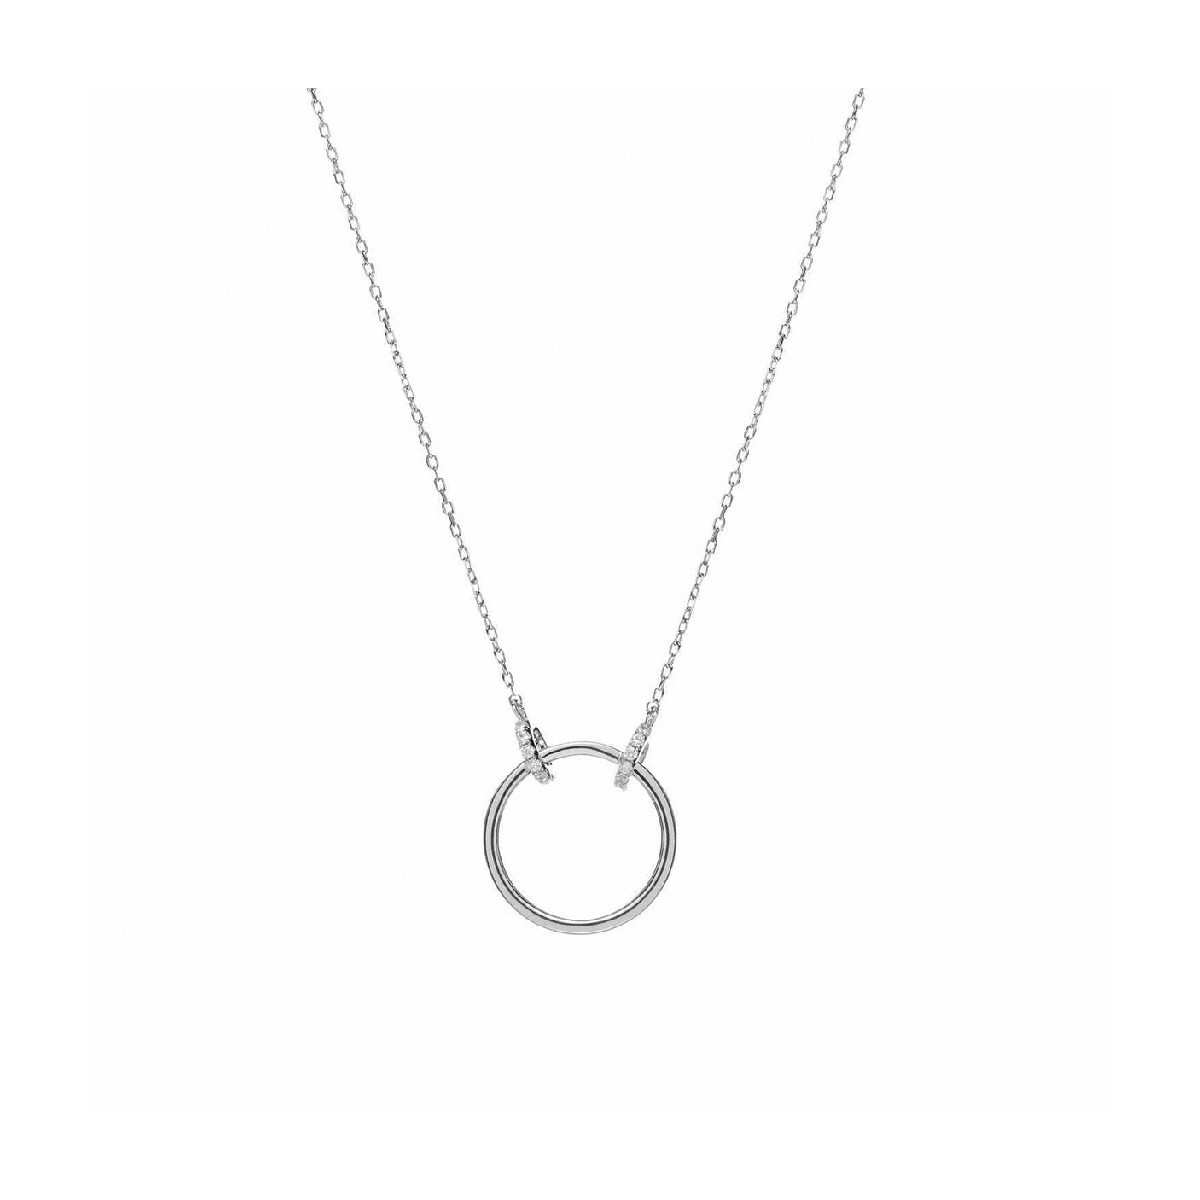 COLLAR LINEARGENT - 18478-PE